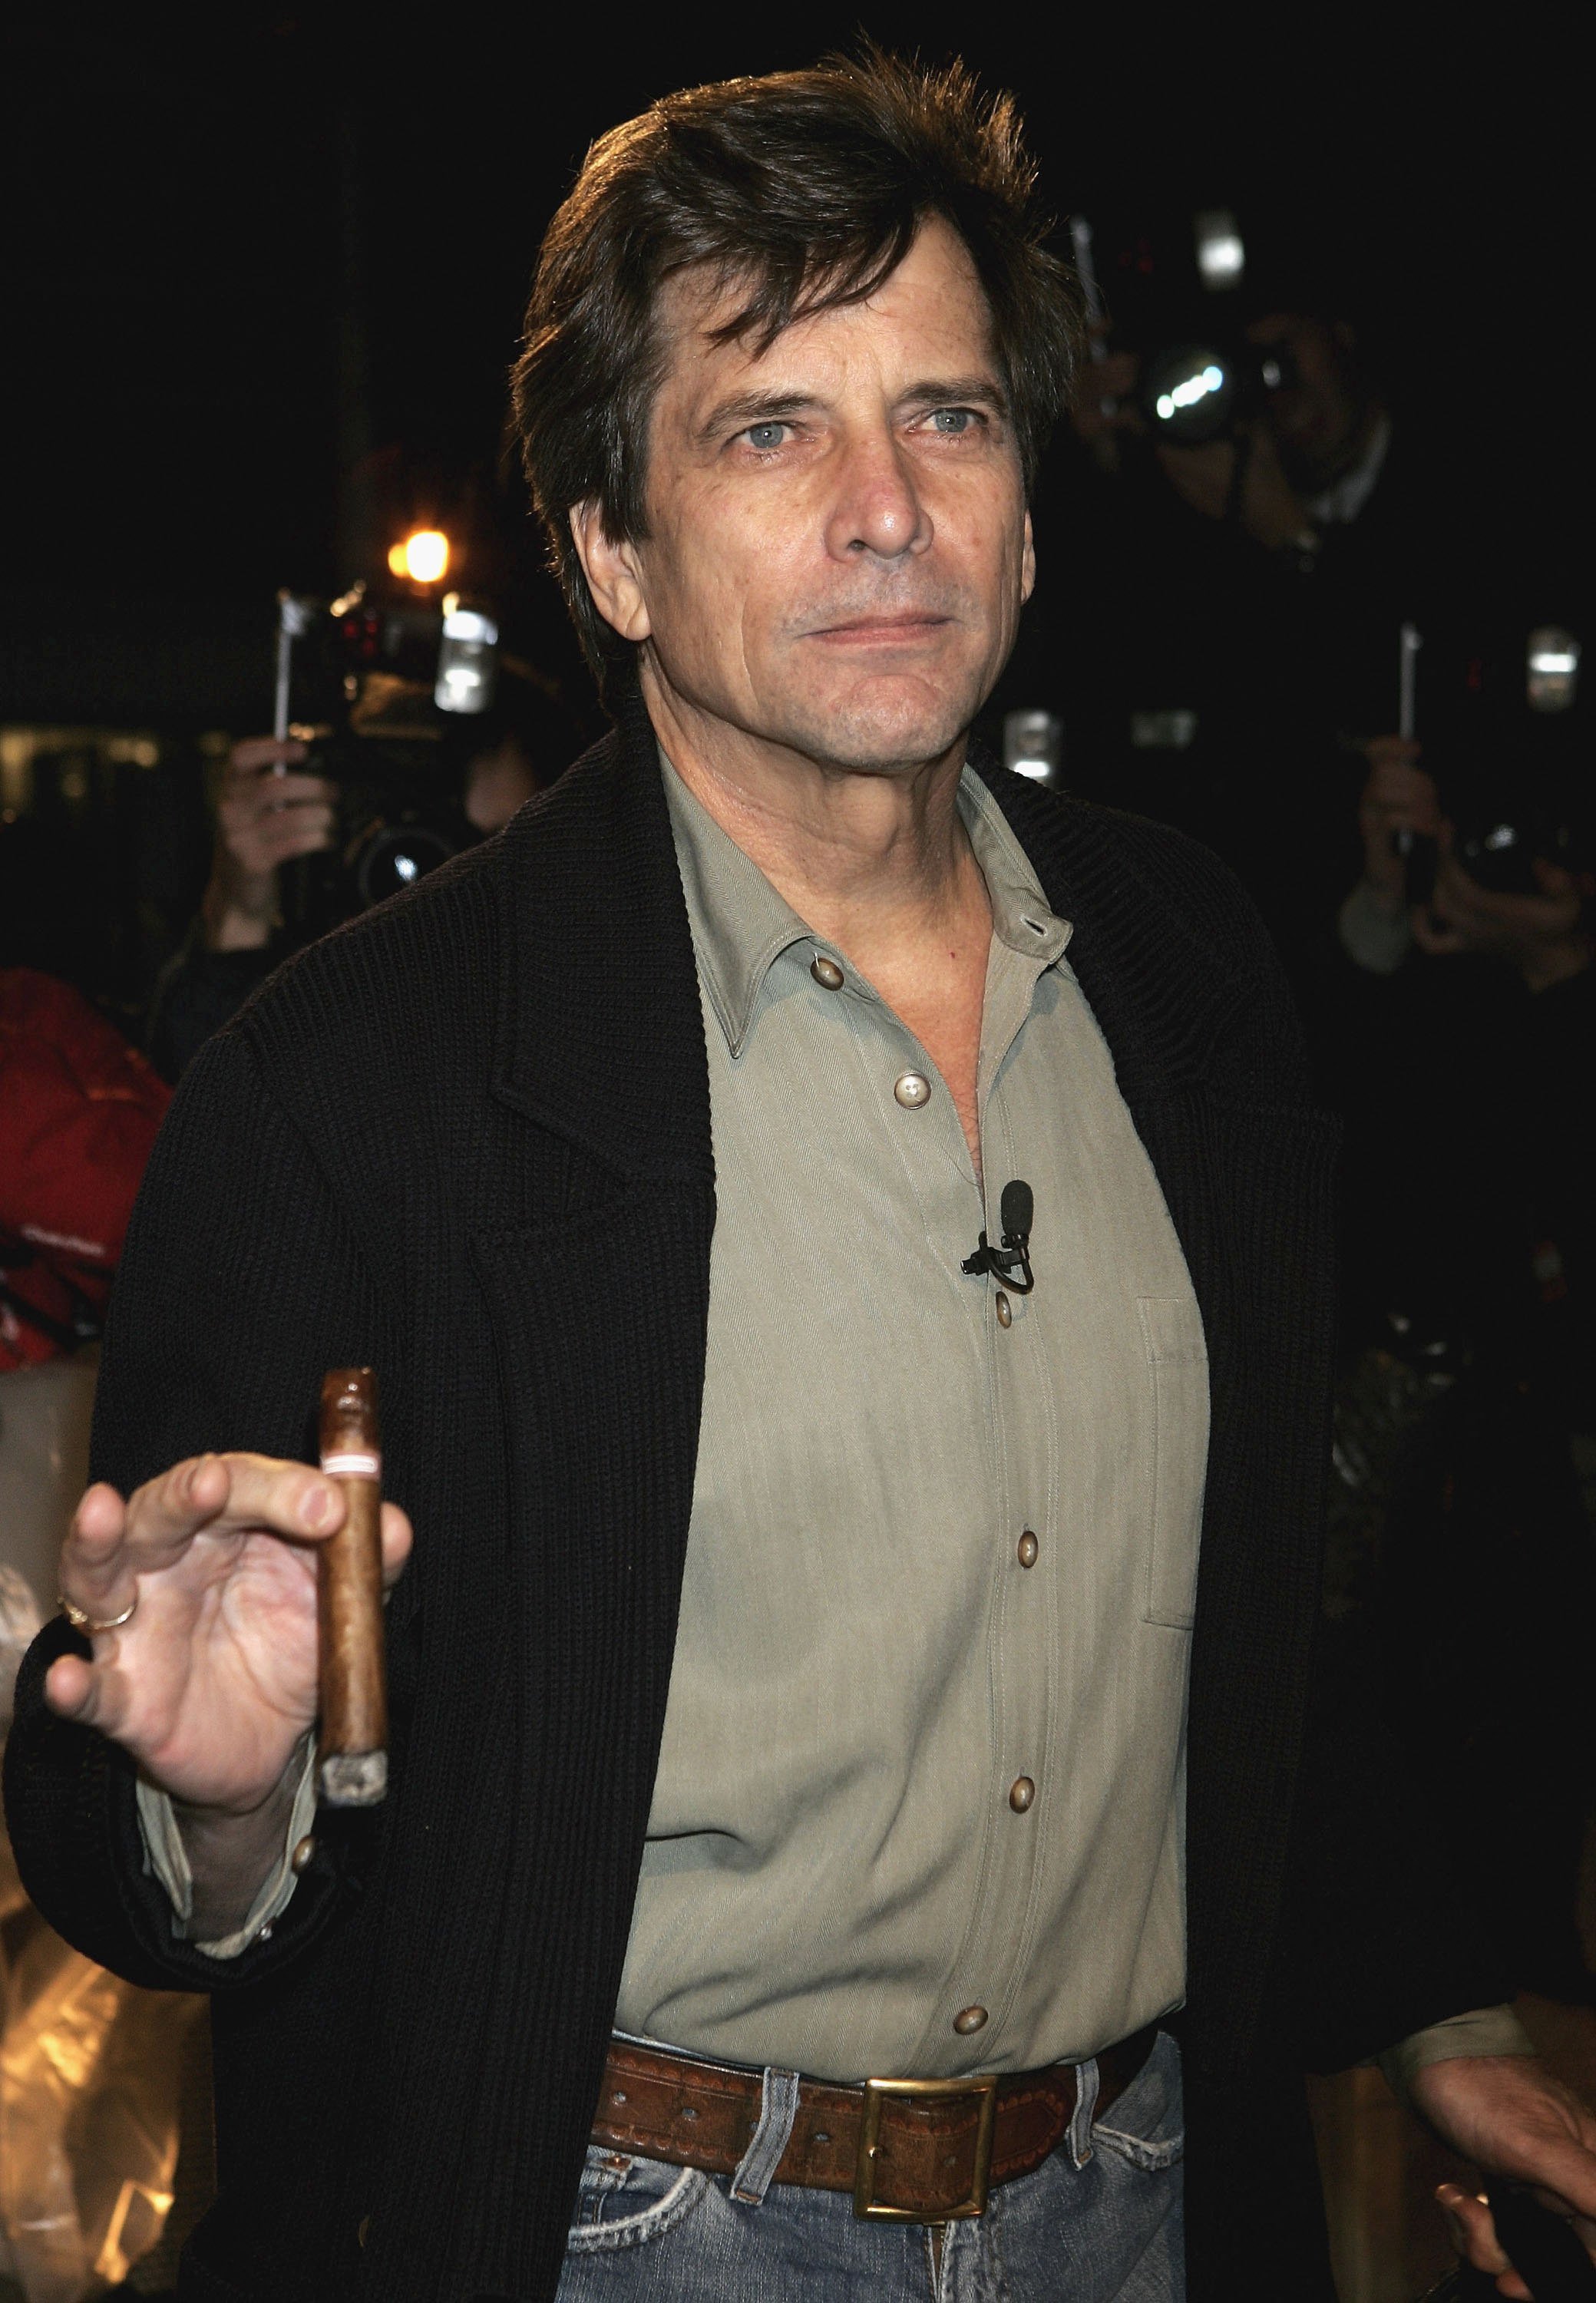 Dirk Benedict at Elstree Studios on January 3, 2006 in London, England. | Photo: Getty Images